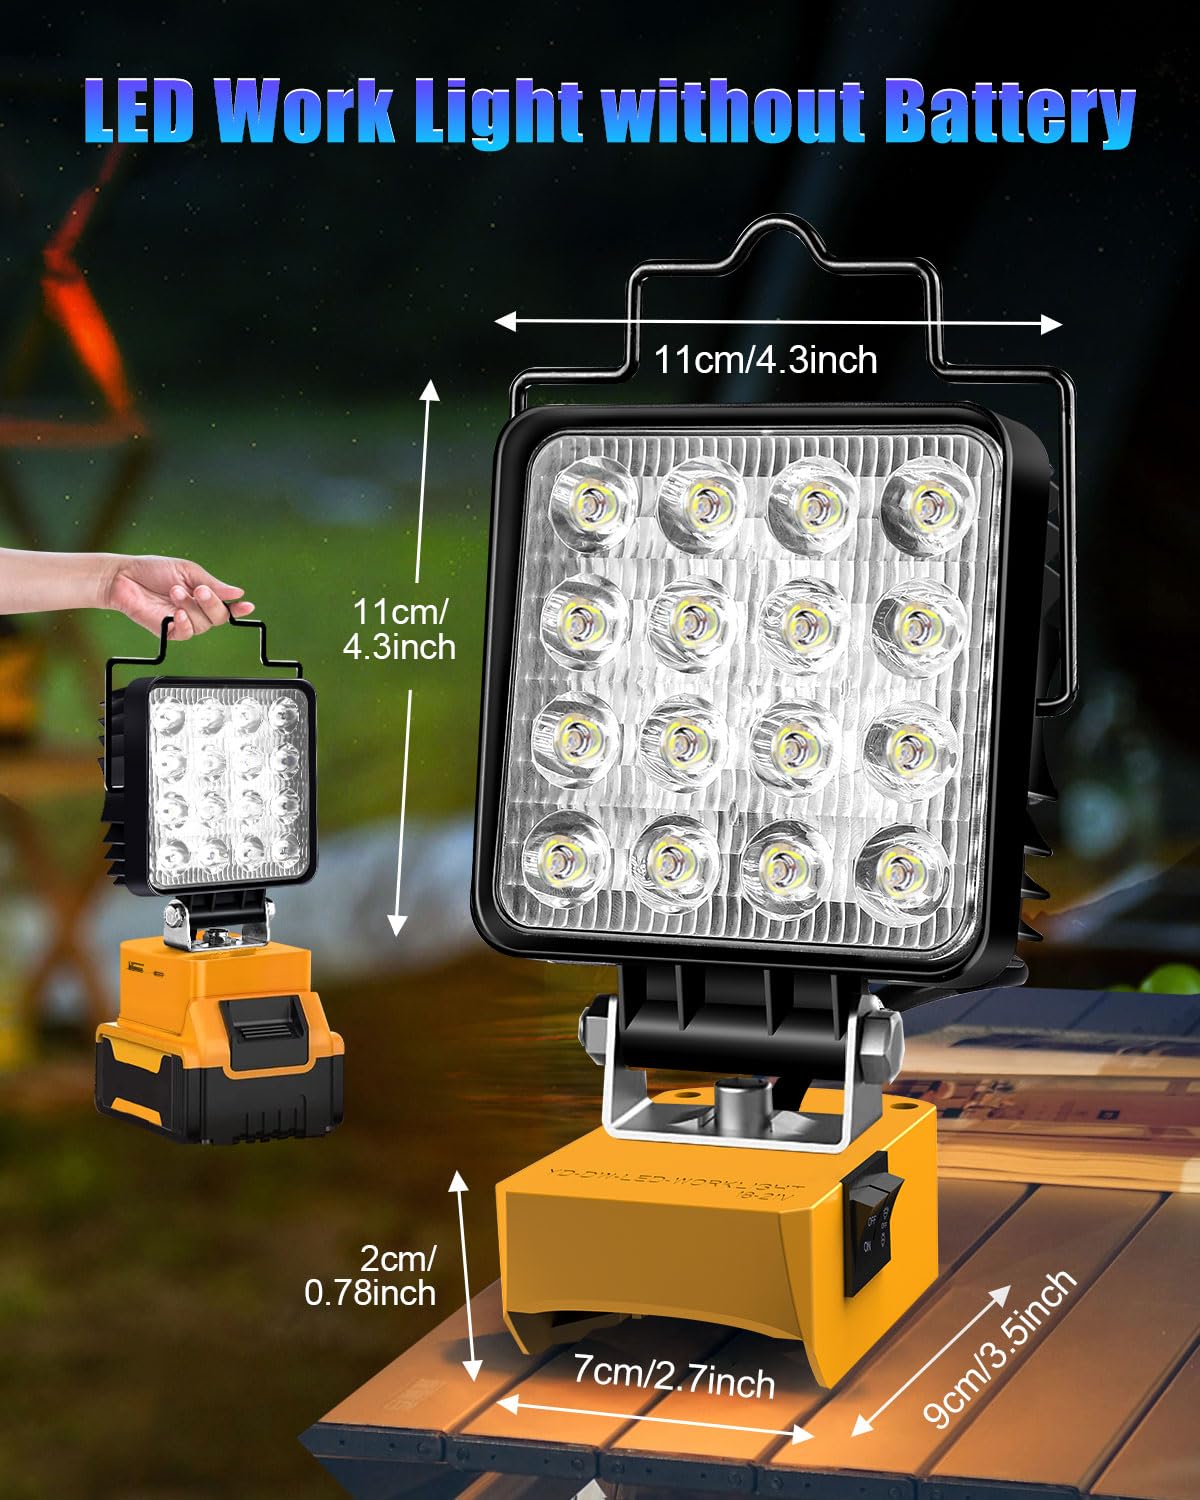 LED Work Light for Dewalt 20v Battery, 48W Dual Switch Battery Protection Flood Light, Cordless Work Light with USB & Type C Charger Port for Workshop, Emergencies, Camping $20.99